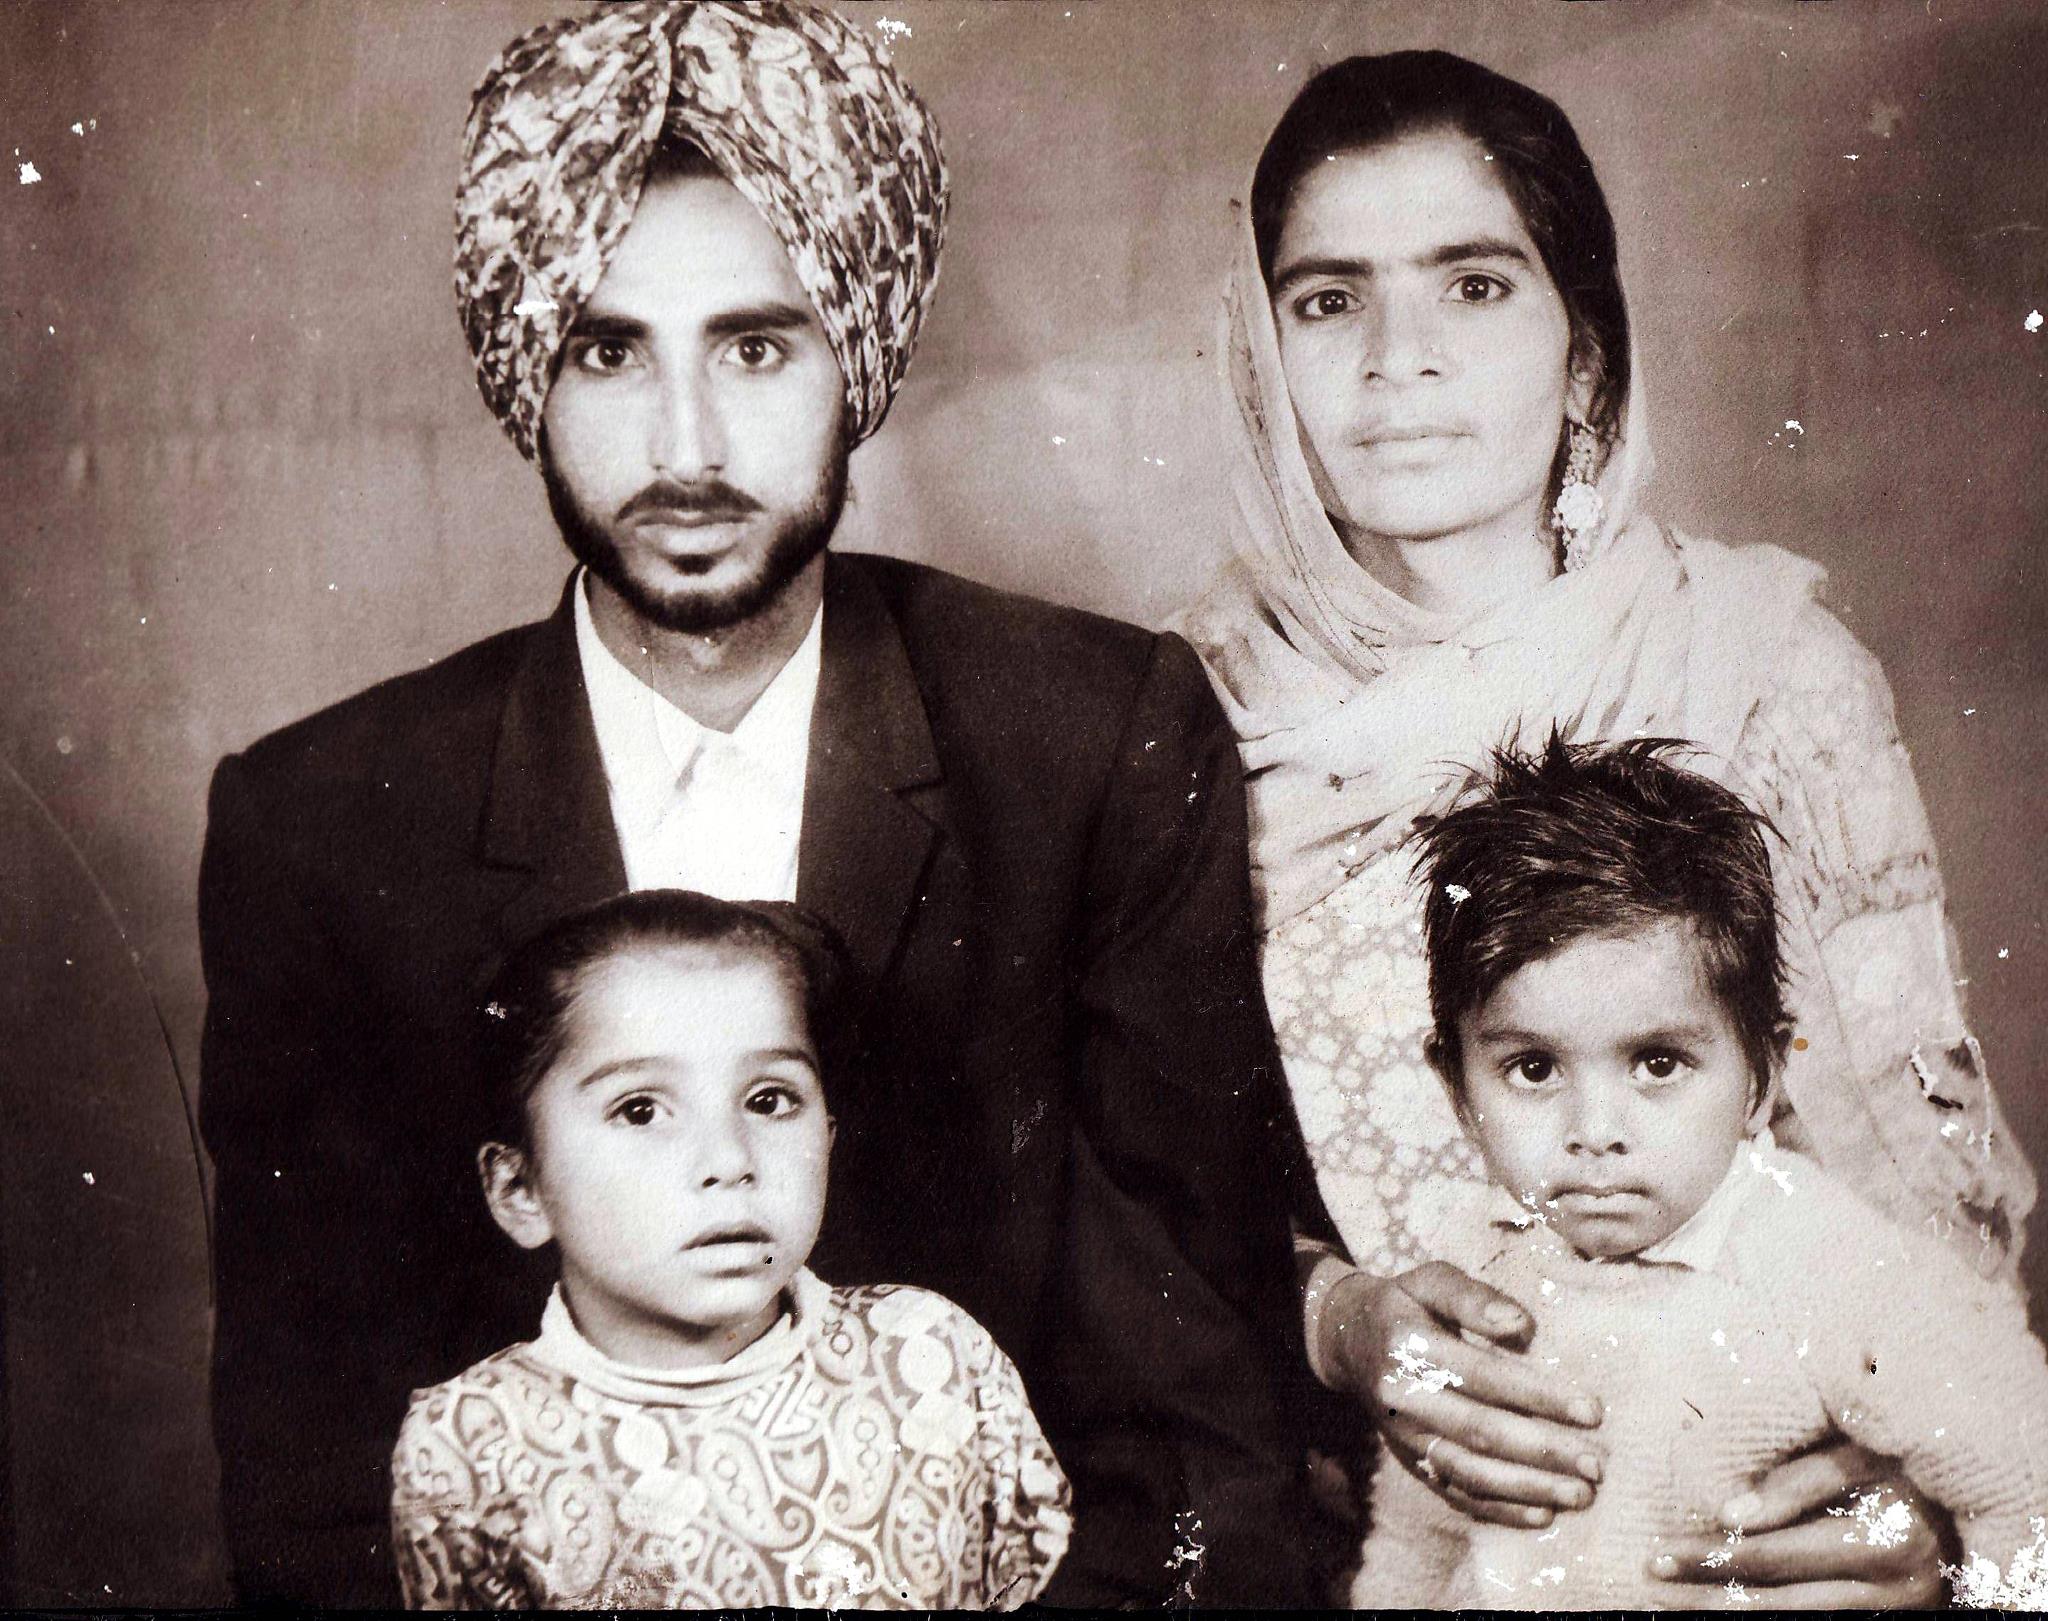 A sepia photo shows a young Mintu with his parents and brother, dressed in traditional Sikhs.